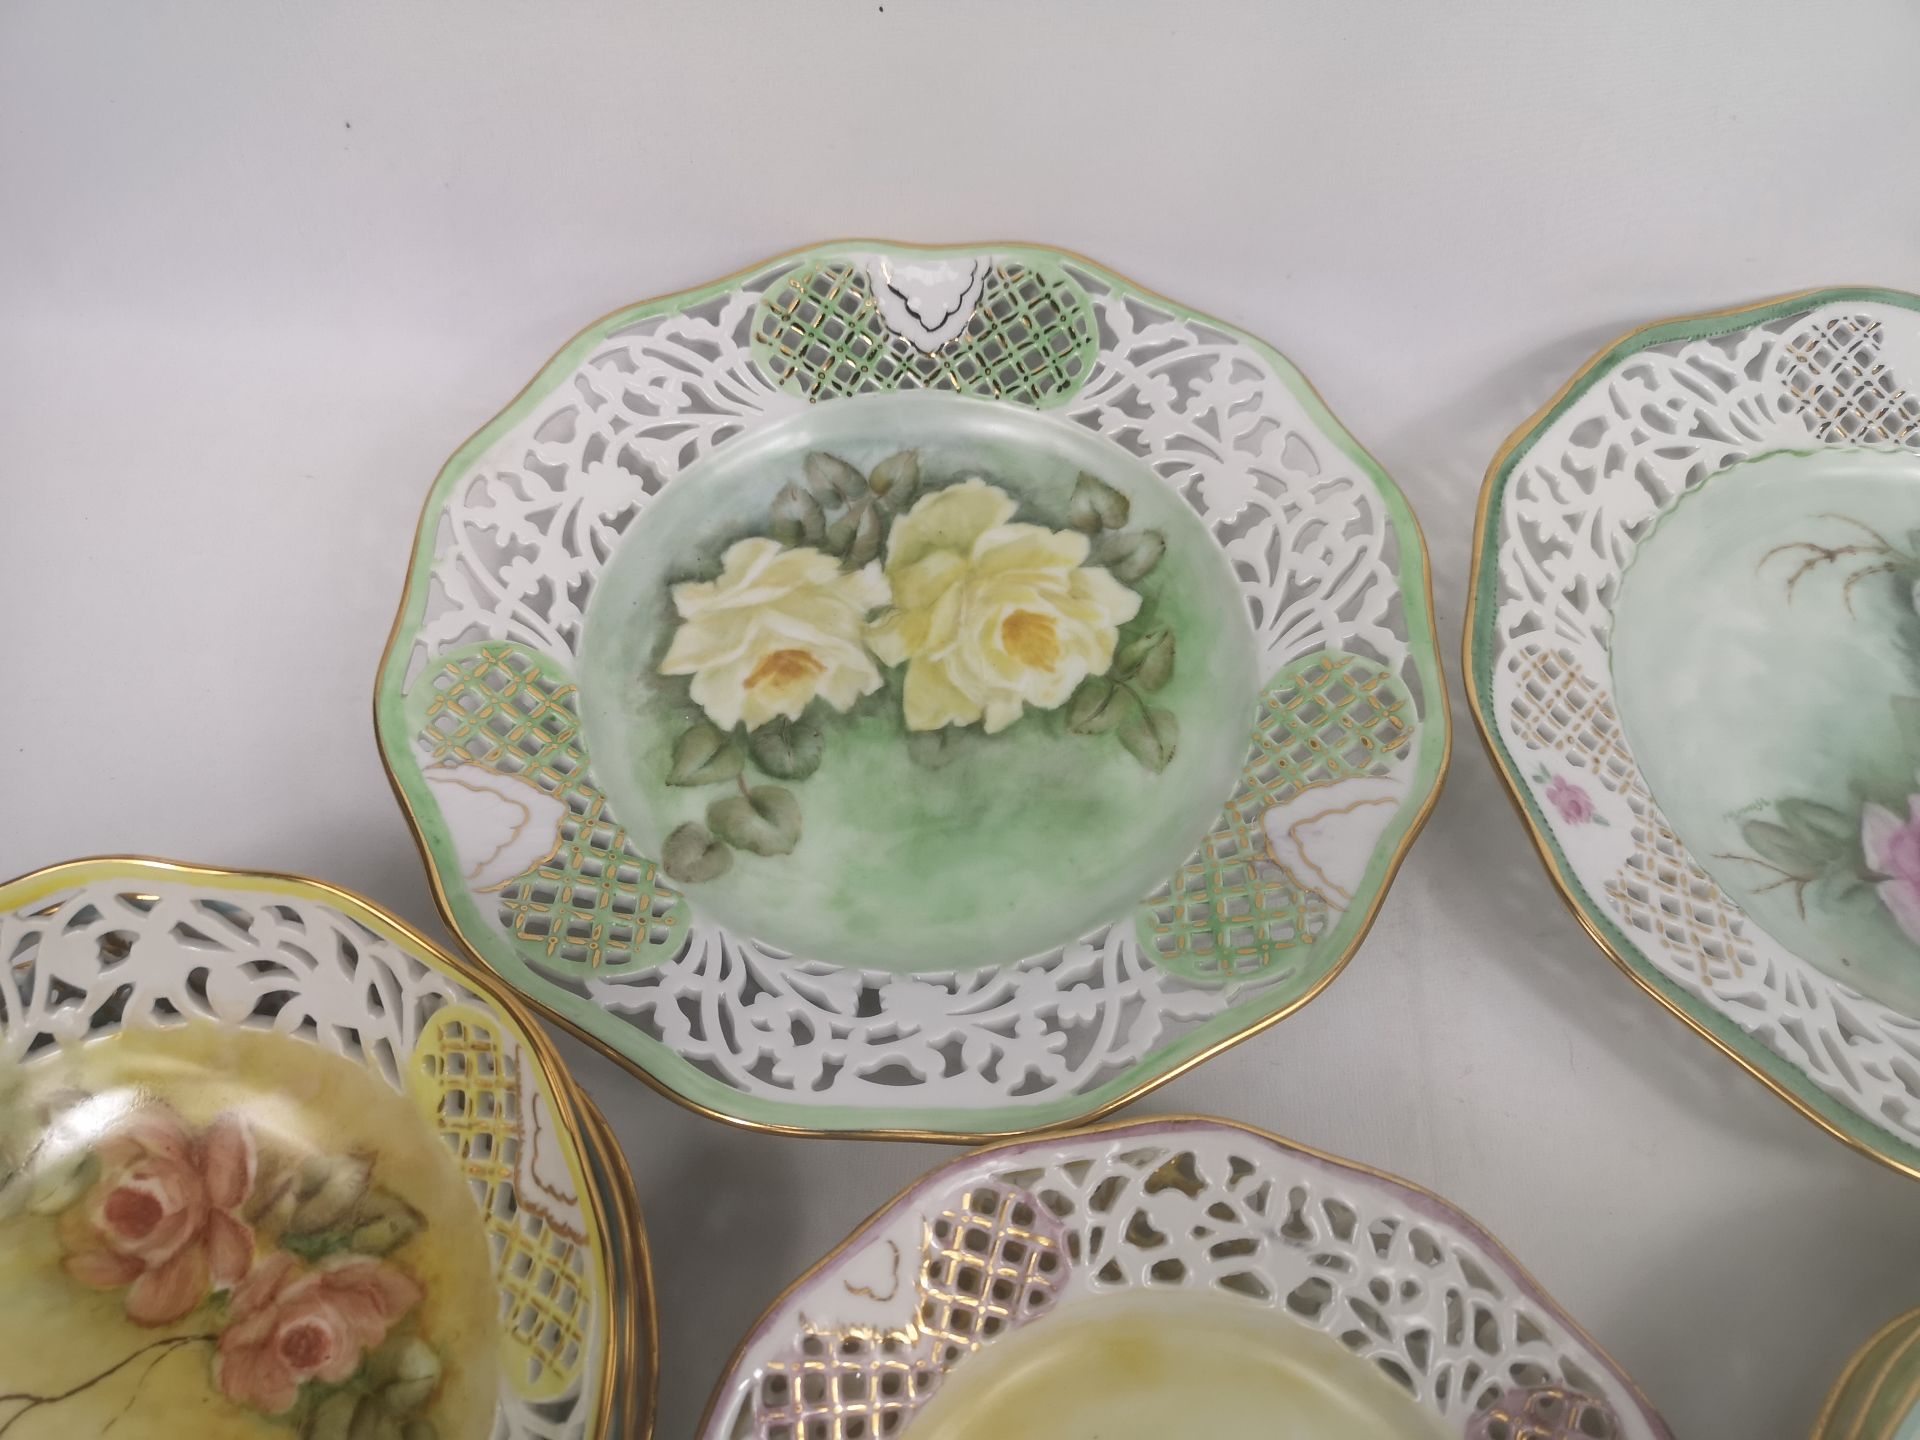 Quantity of hand painted plates and bowls by Marjorie Stevenson - Image 5 of 8